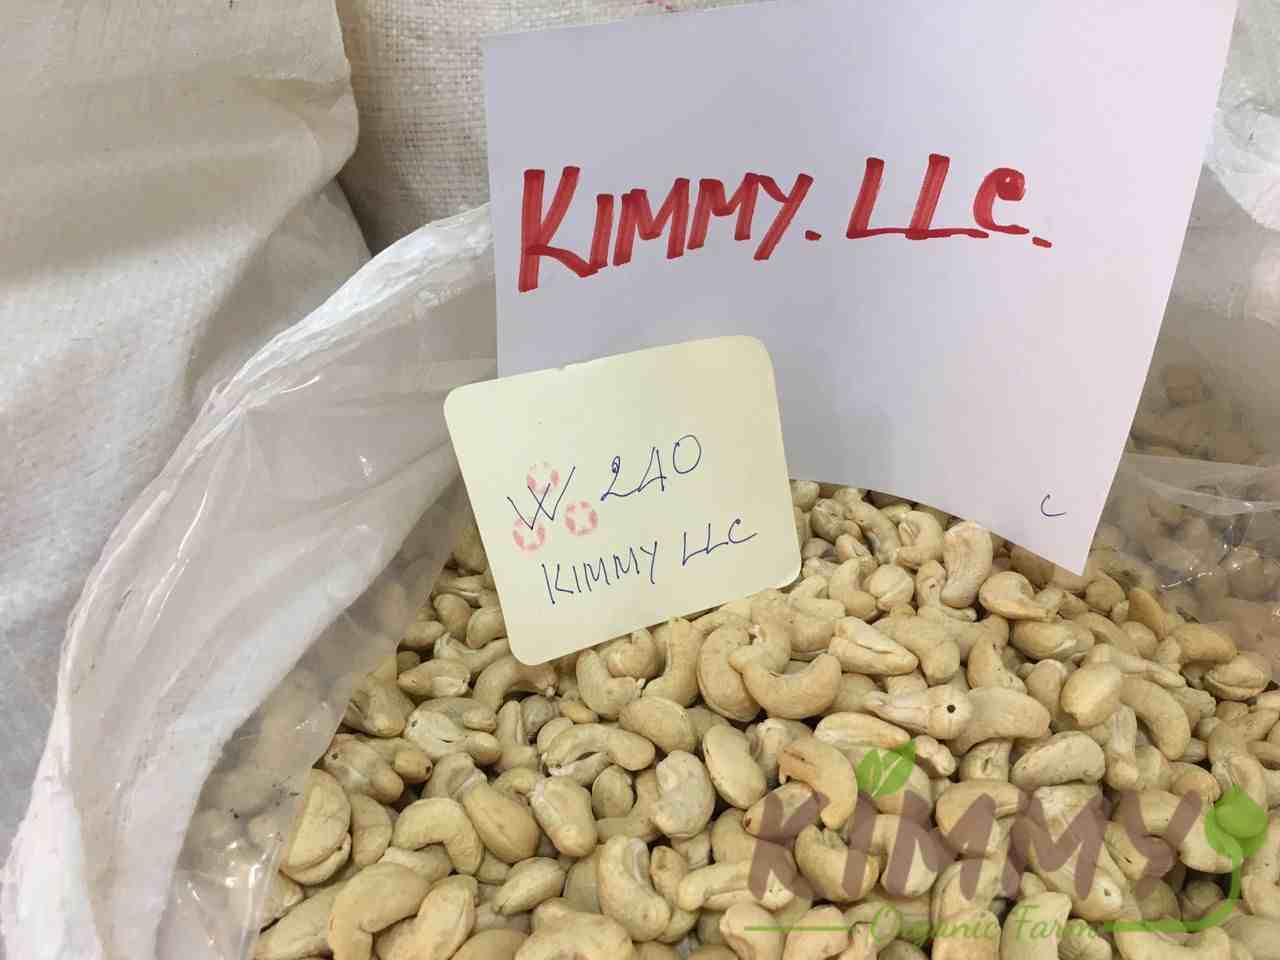 Vietnam W240 Cashew Nut White Whole Cashews High Quality Ready For Export Raw Image Of W240 From Our Cashew Factory! 4